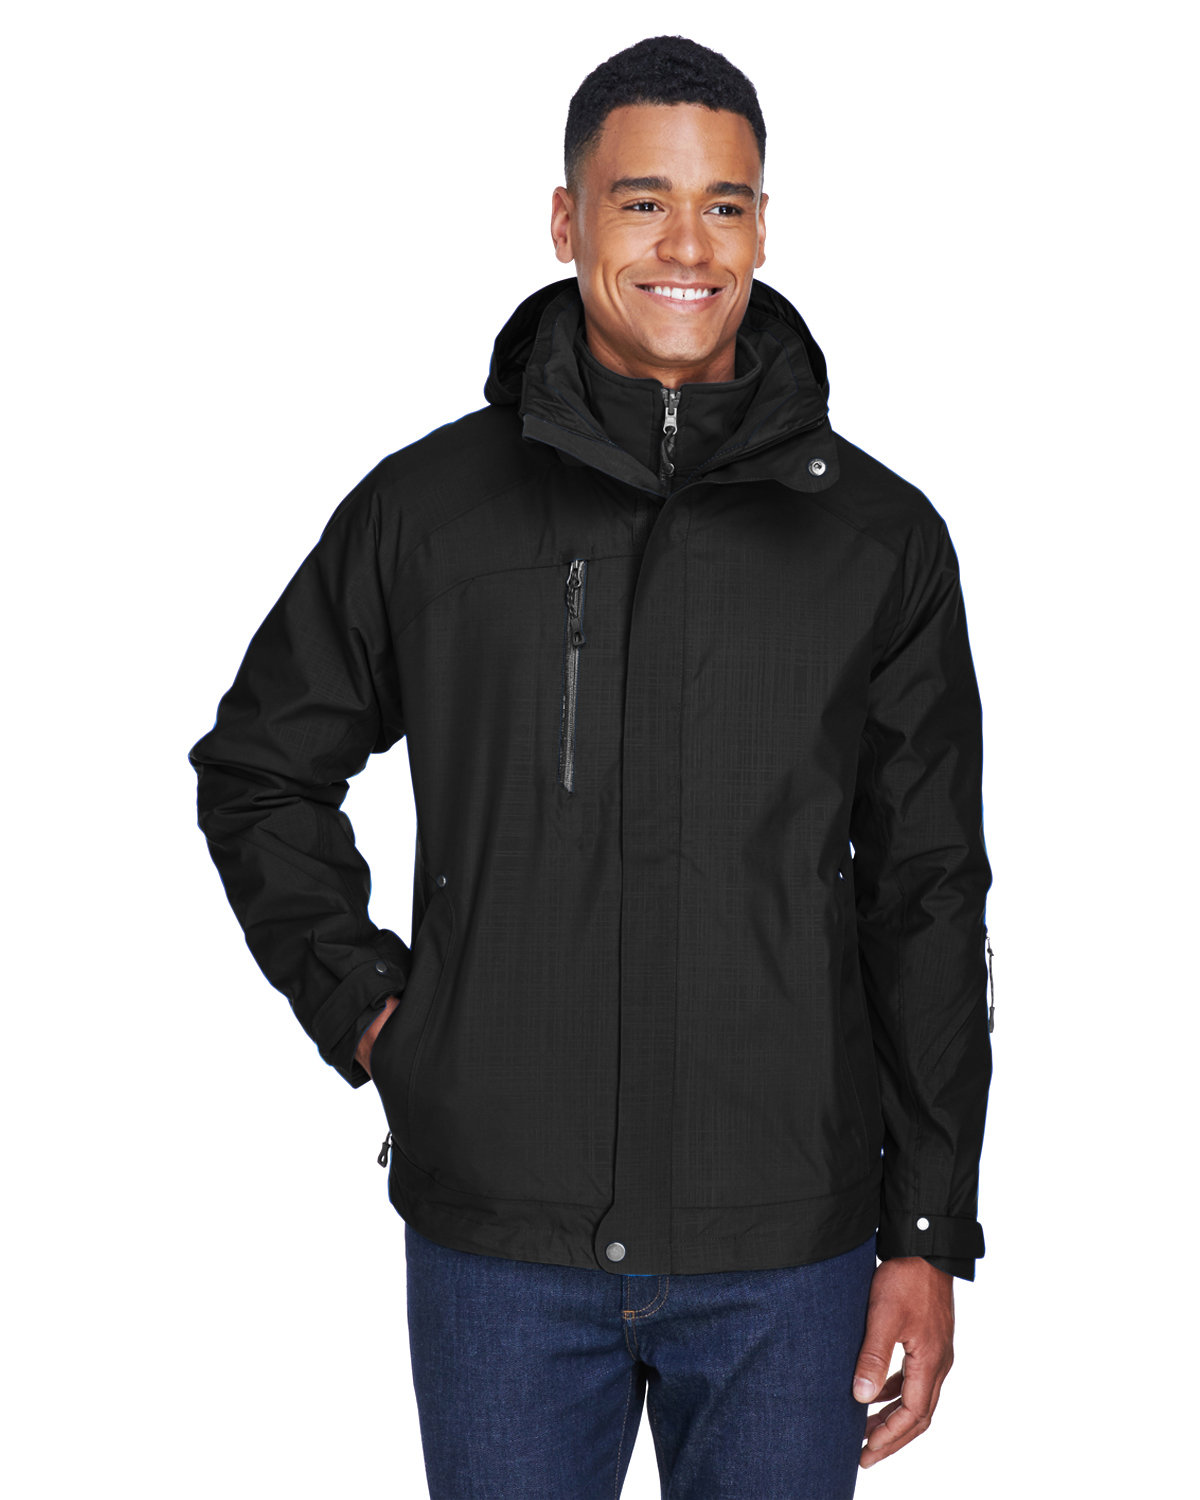 North End Men's Caprice 3-in-1 Jacket with Soft Shell Liner BLACK 